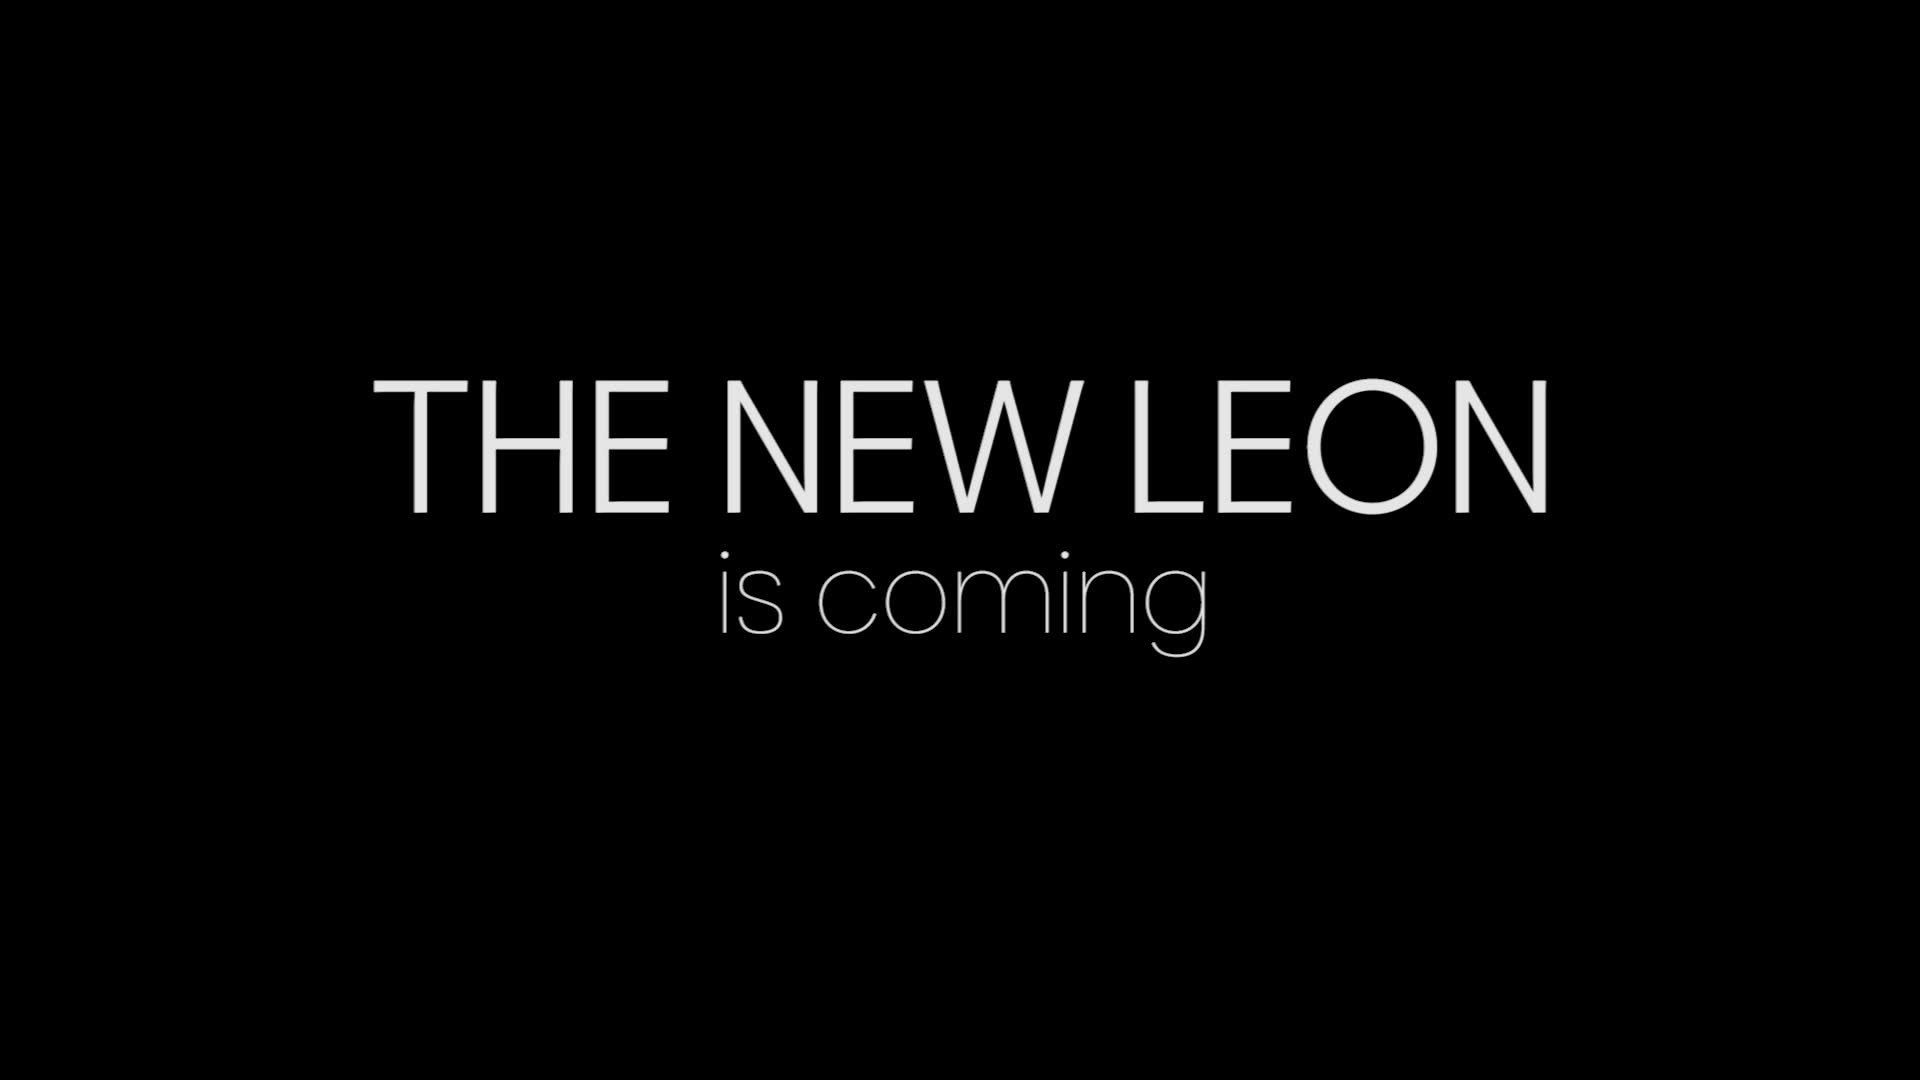 The new Leon is coming